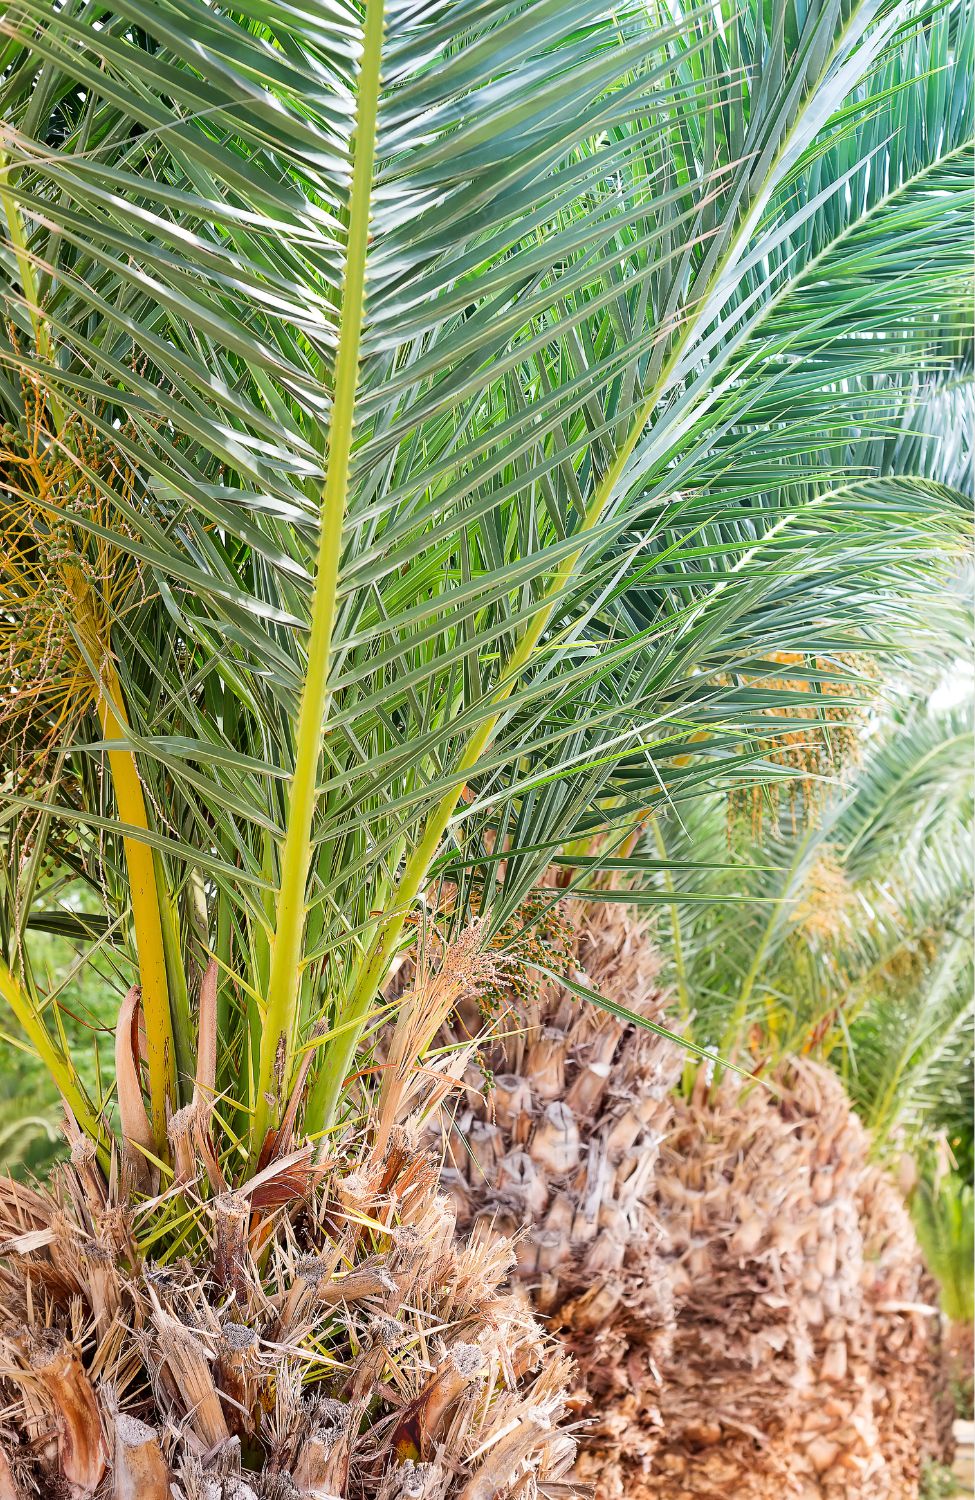 Phoenix Canariensis Seeds - The Perfect Choice for Anyone Looking to Add Some Greenery to Their Backyard!